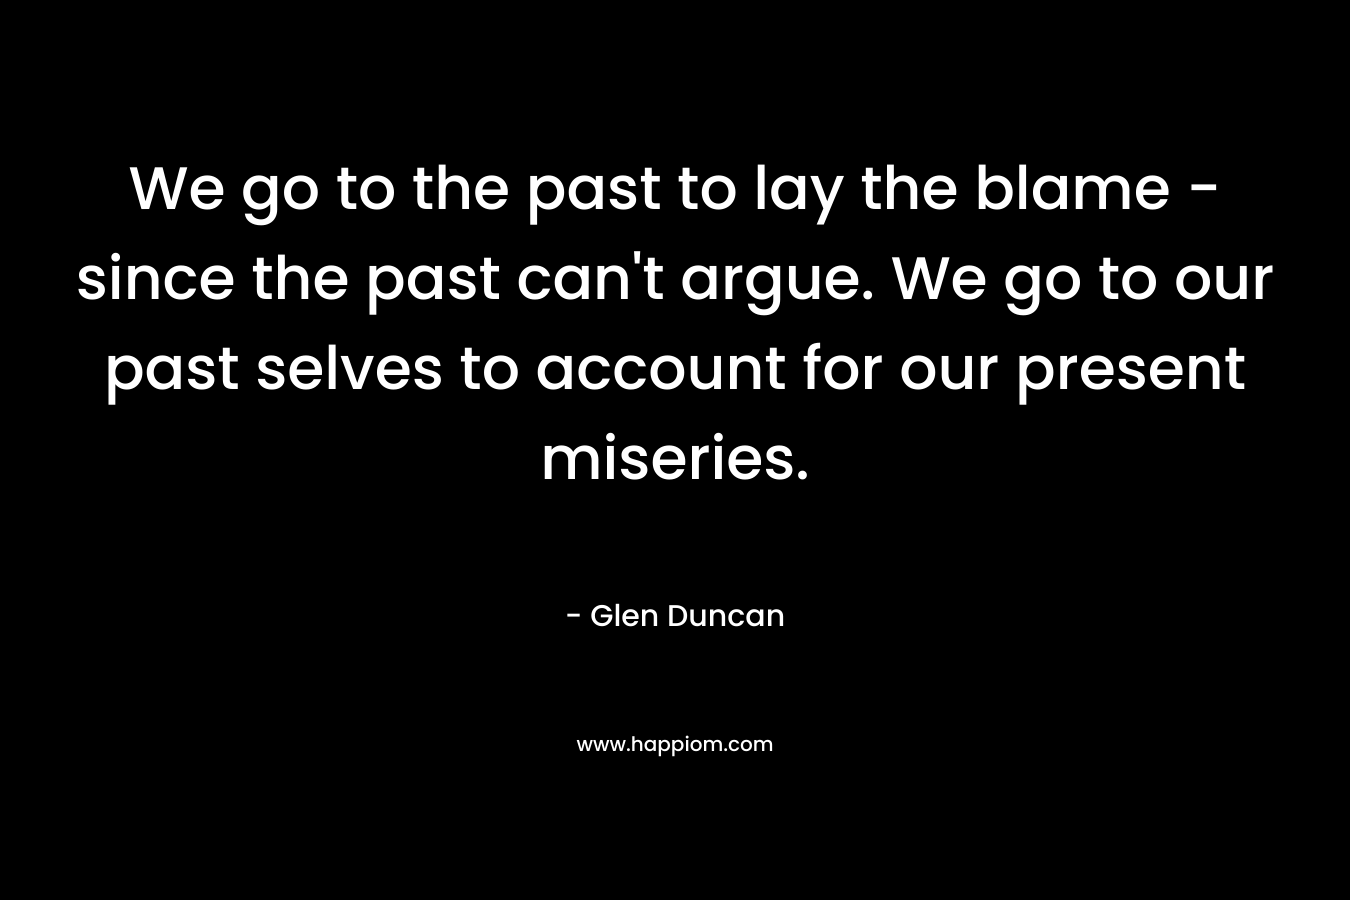 We go to the past to lay the blame - since the past can't argue. We go to our past selves to account for our present miseries.